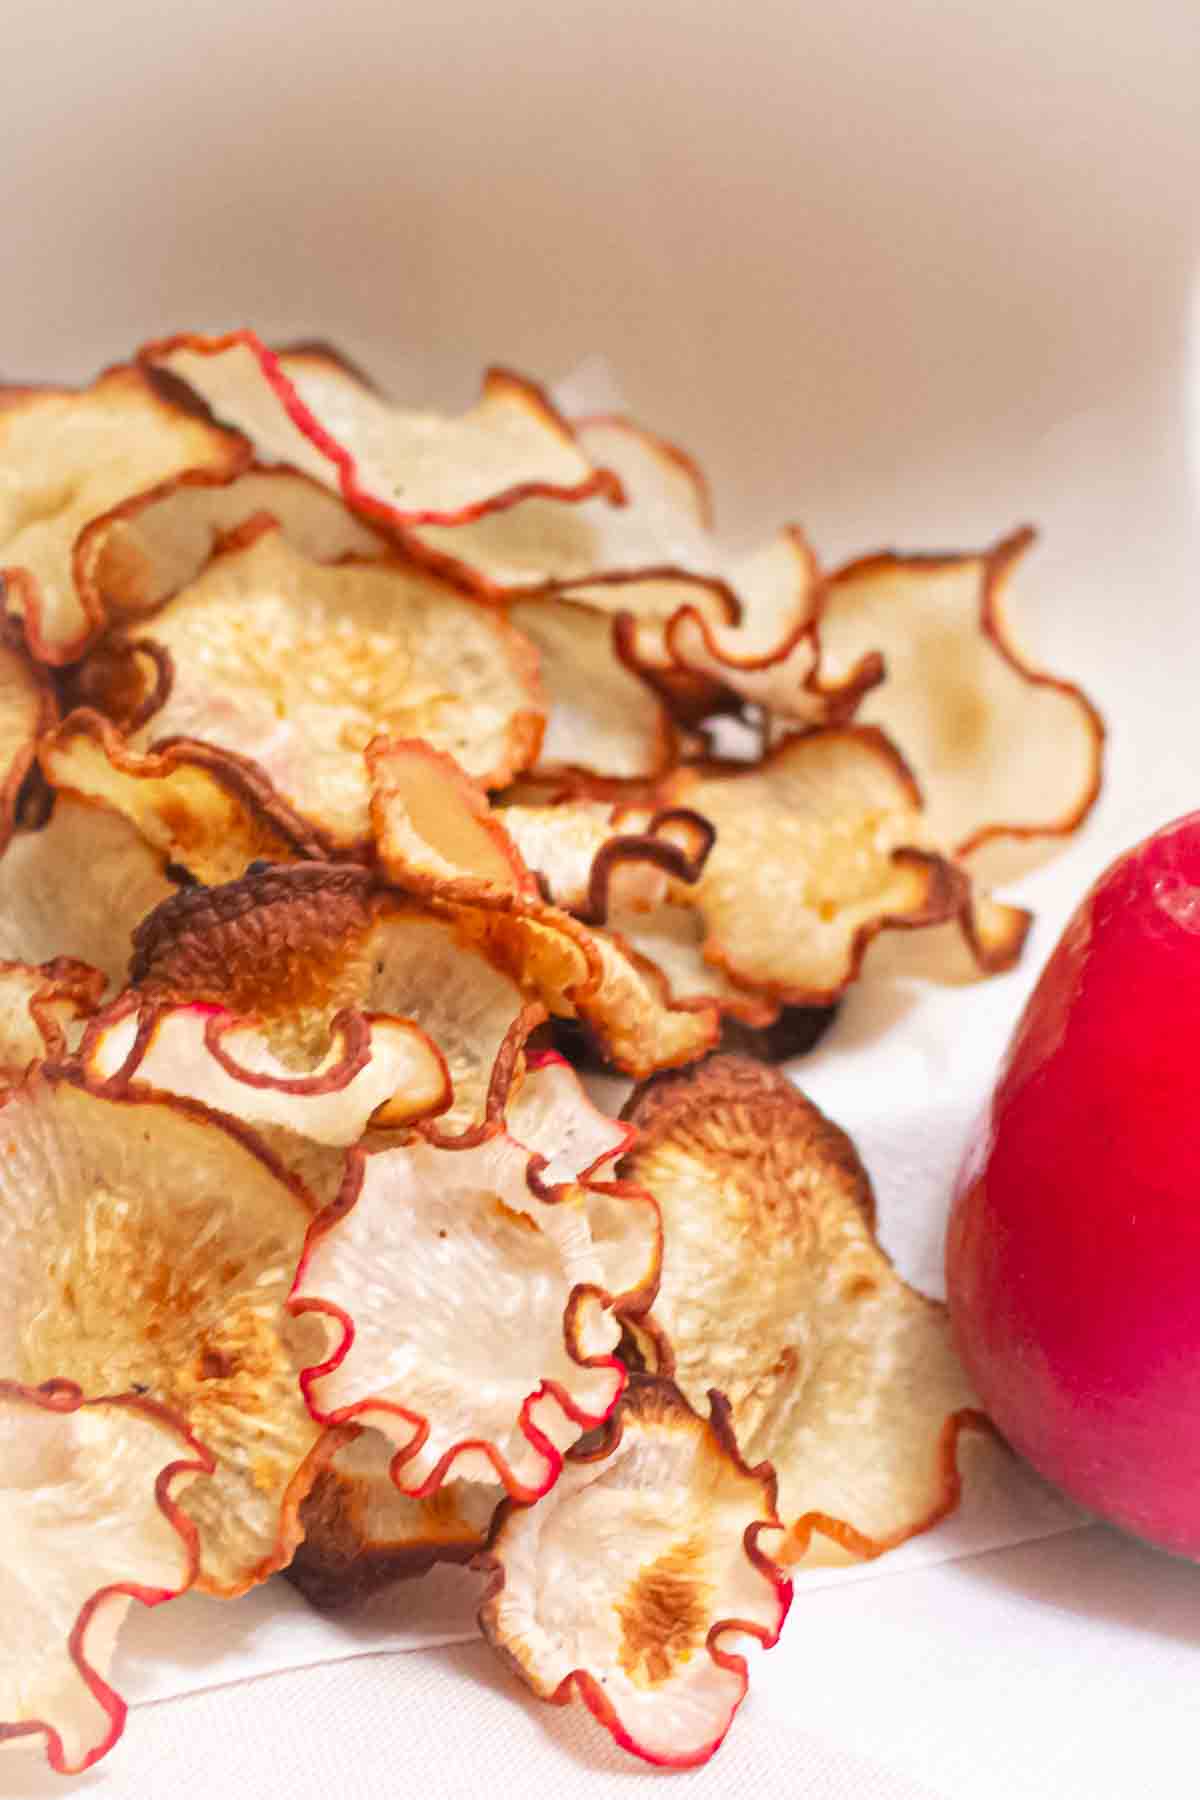 Sliced radishes on a white plate.